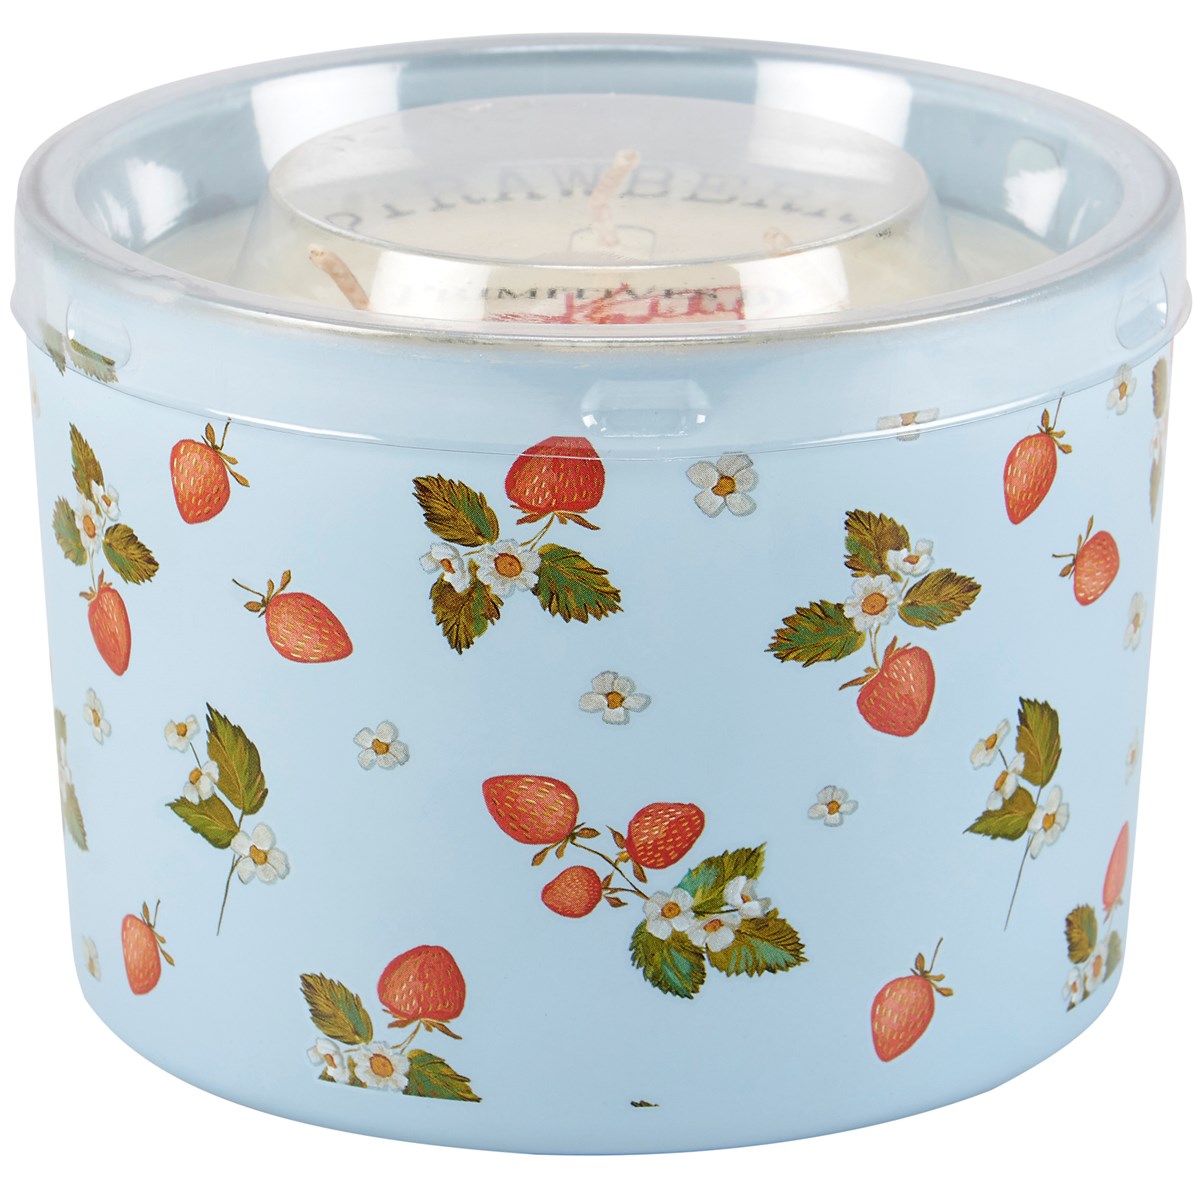 Strawberry Candle - Soy Wax, Glass, Cotton